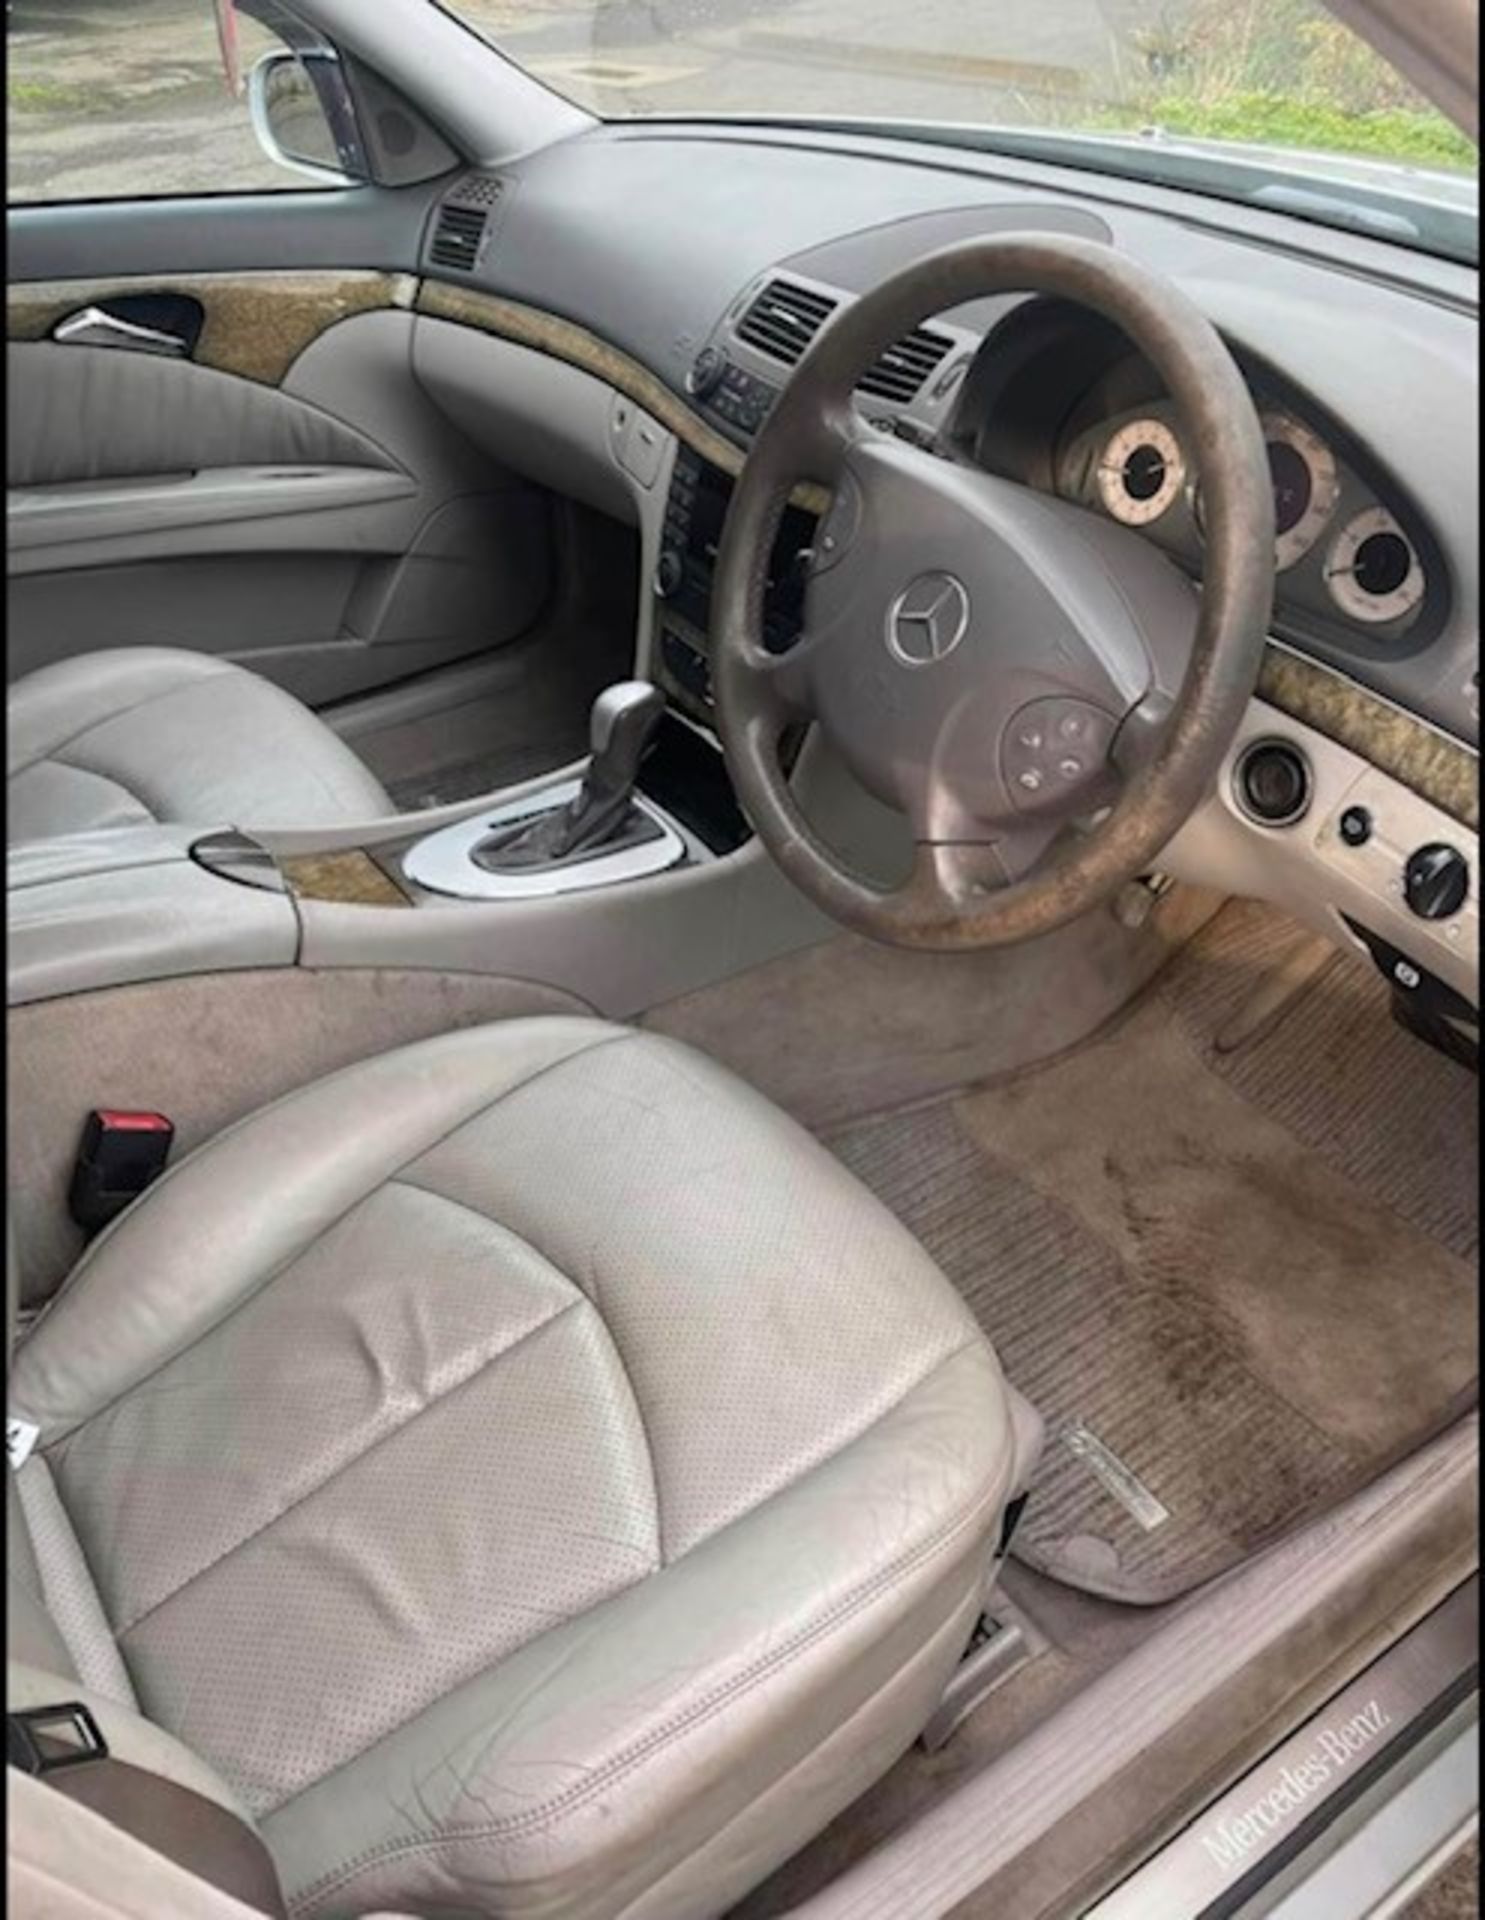 Mercedes E320 CDI 103k genuine miles ,as per pictures has scratches as shown in photos but is all in - Bild 14 aus 14